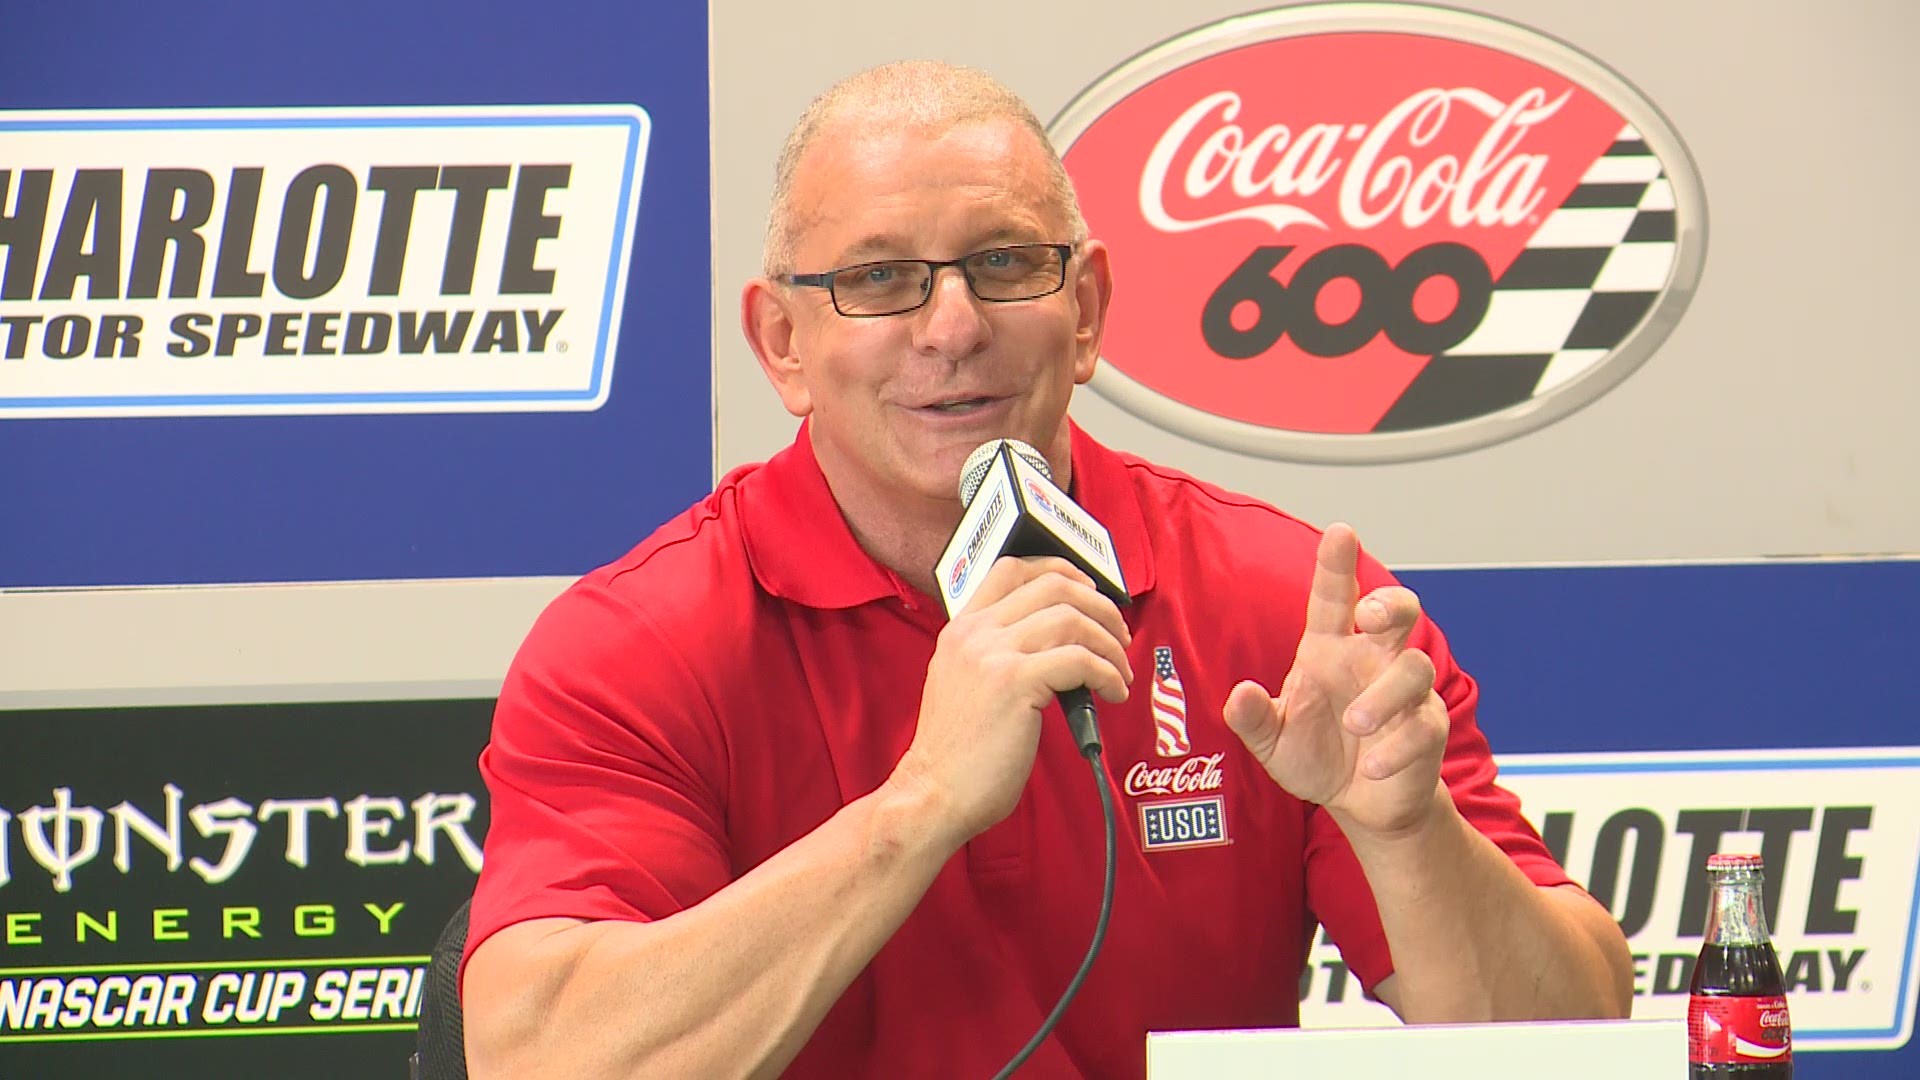 Celebrity chef Robert Irvine served as the grand marshal for Sunday's Coca Cola 600. He talked about his involvement with the title sponsor of the race and the USO which plays a major role in supporting the military.